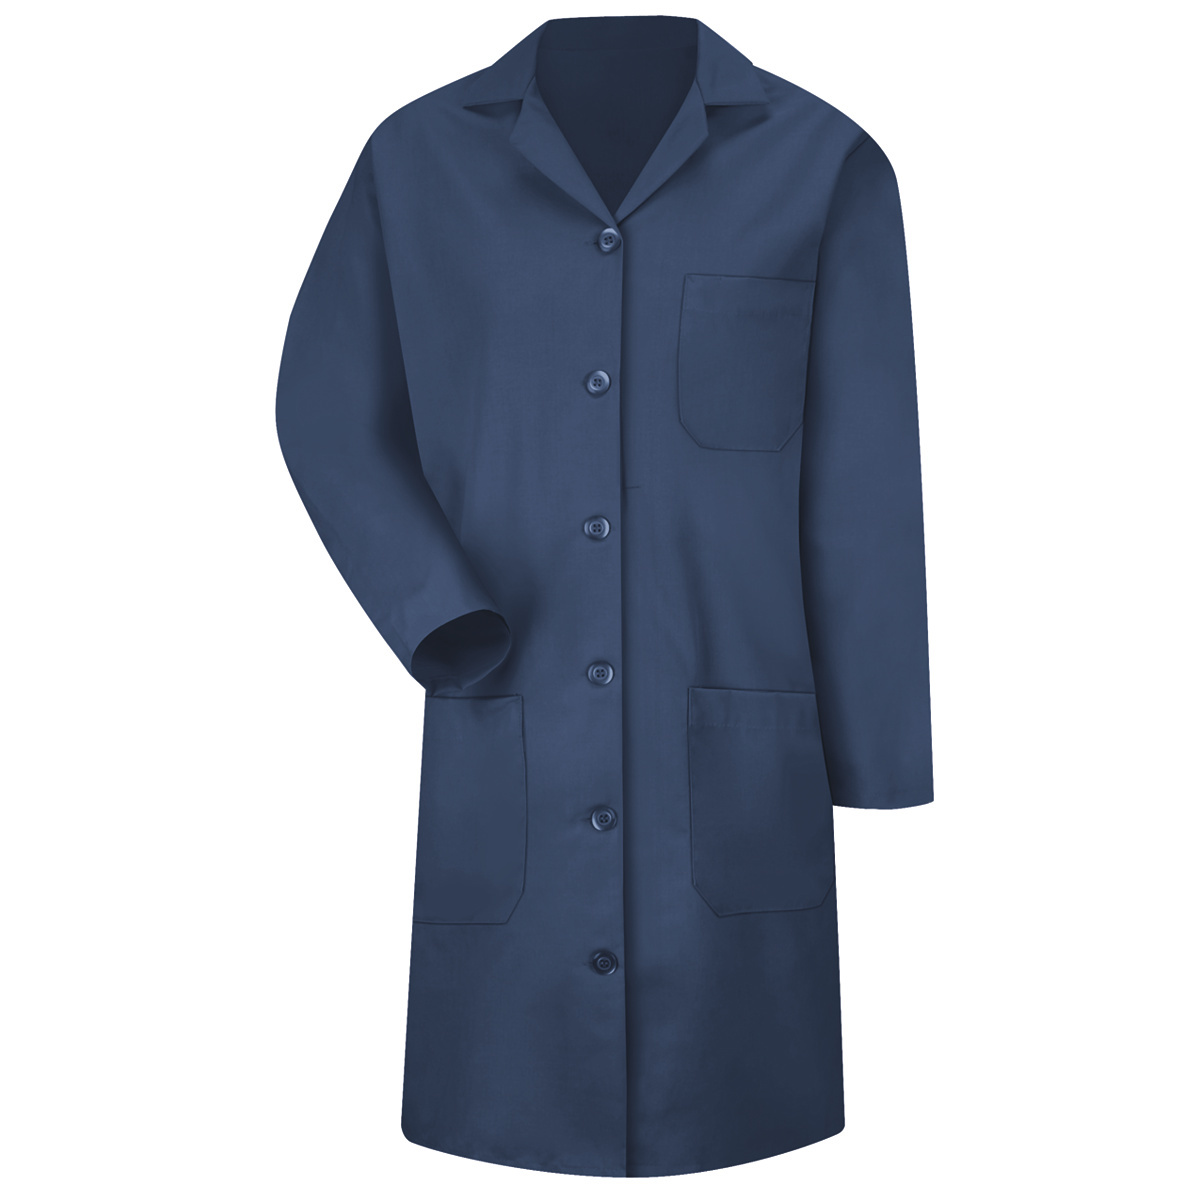 Red Kap® Large/Regular Blue 5 Ounce Lab Coat With Button Closure